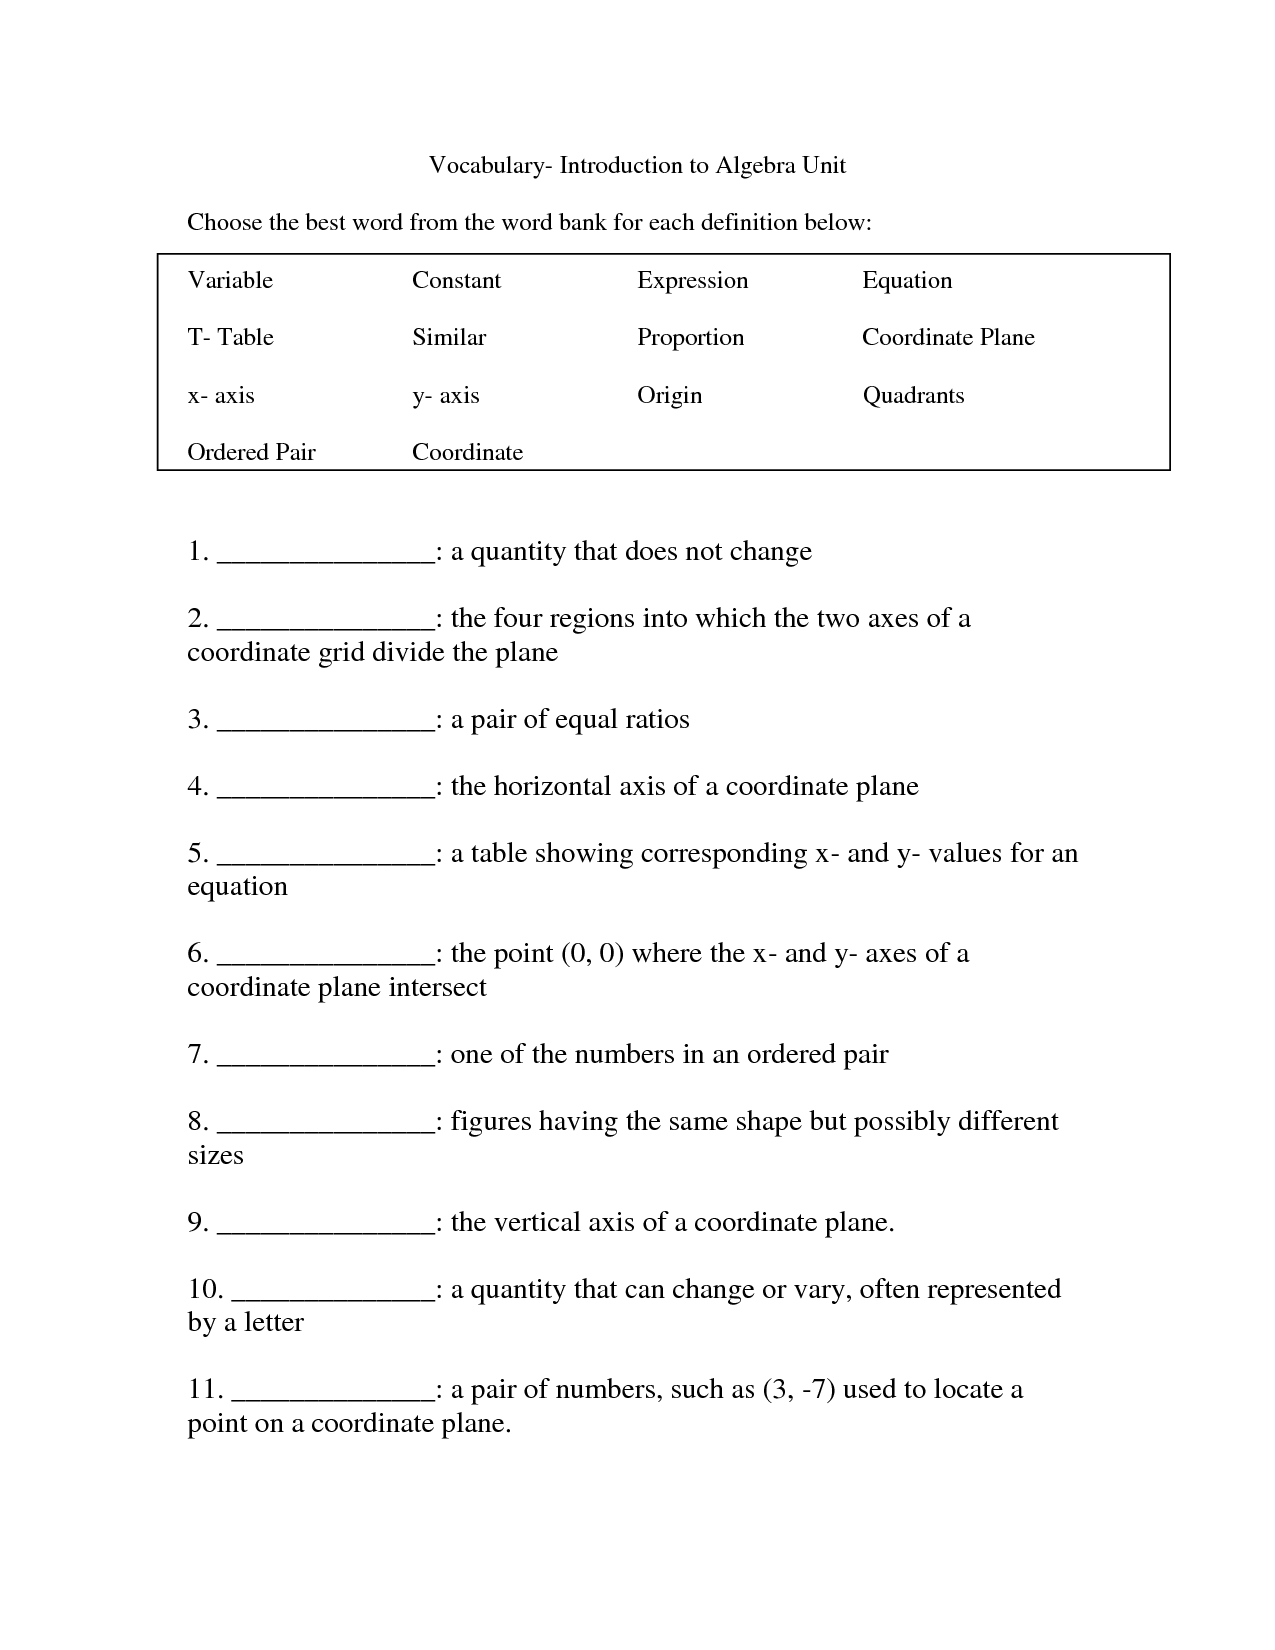 15 Best Images Of Statistical Questions Worksheets 6th Grade 6th Grade Math Worksheets Algebra